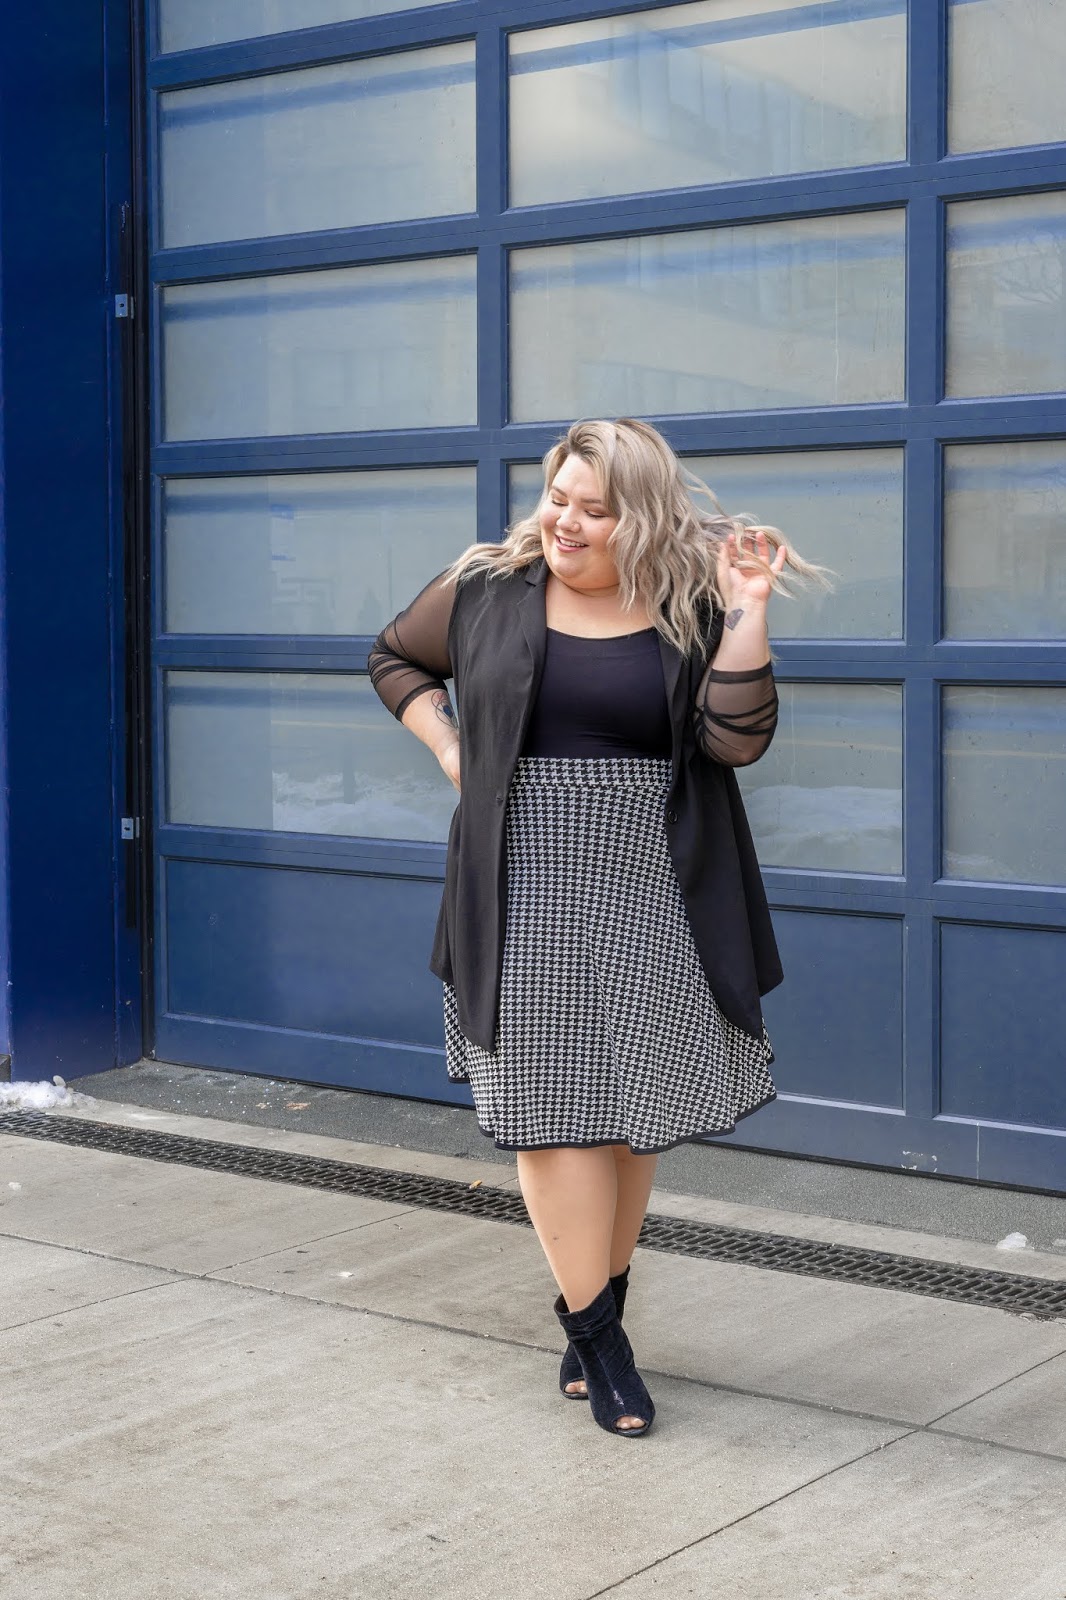 Chicago Plus Size Petite Fashion Blogger and model Natalie Craig, of Natalie in the City, joins Dia & Co. in their #WhatISeeInHer campaign.